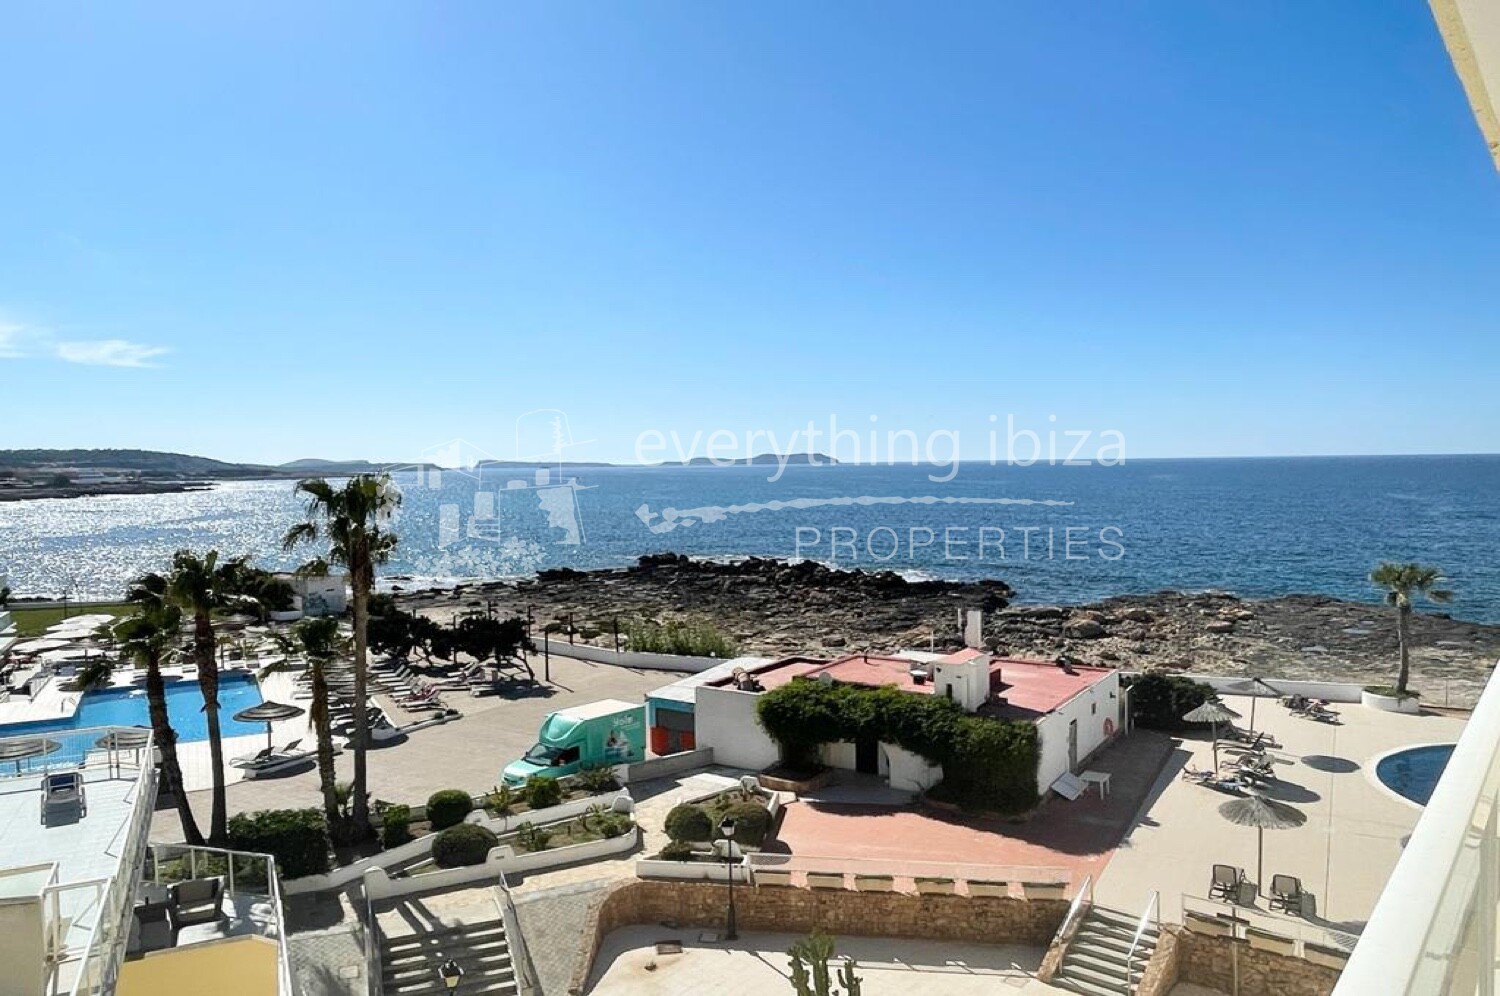 Modern Frontline 1 Bed Apartment with Sea Views, ref. 1455, for sale in Ibiza by everything ibiza Properties